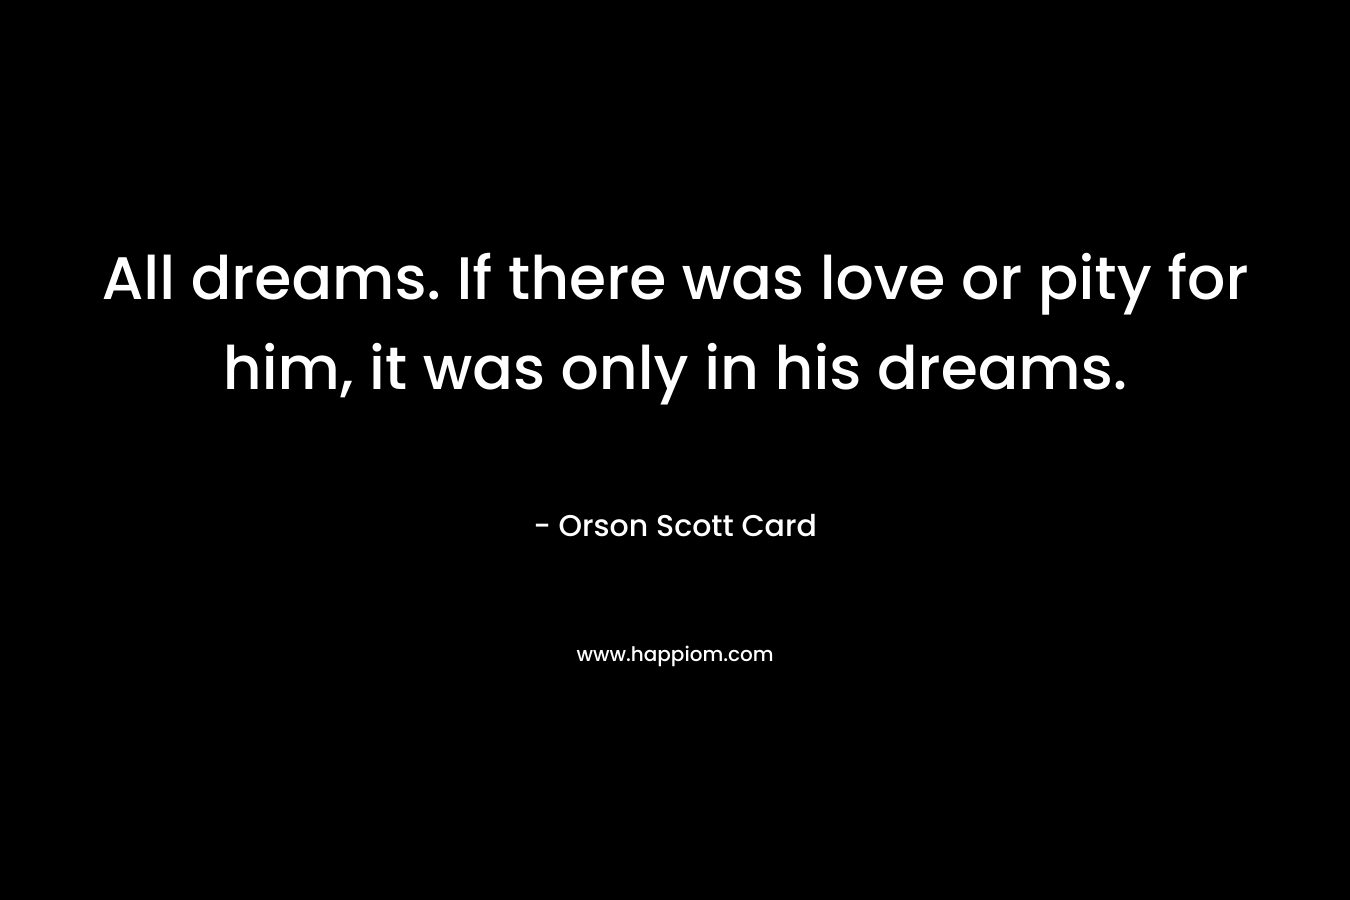 All dreams. If there was love or pity for him, it was only in his dreams.